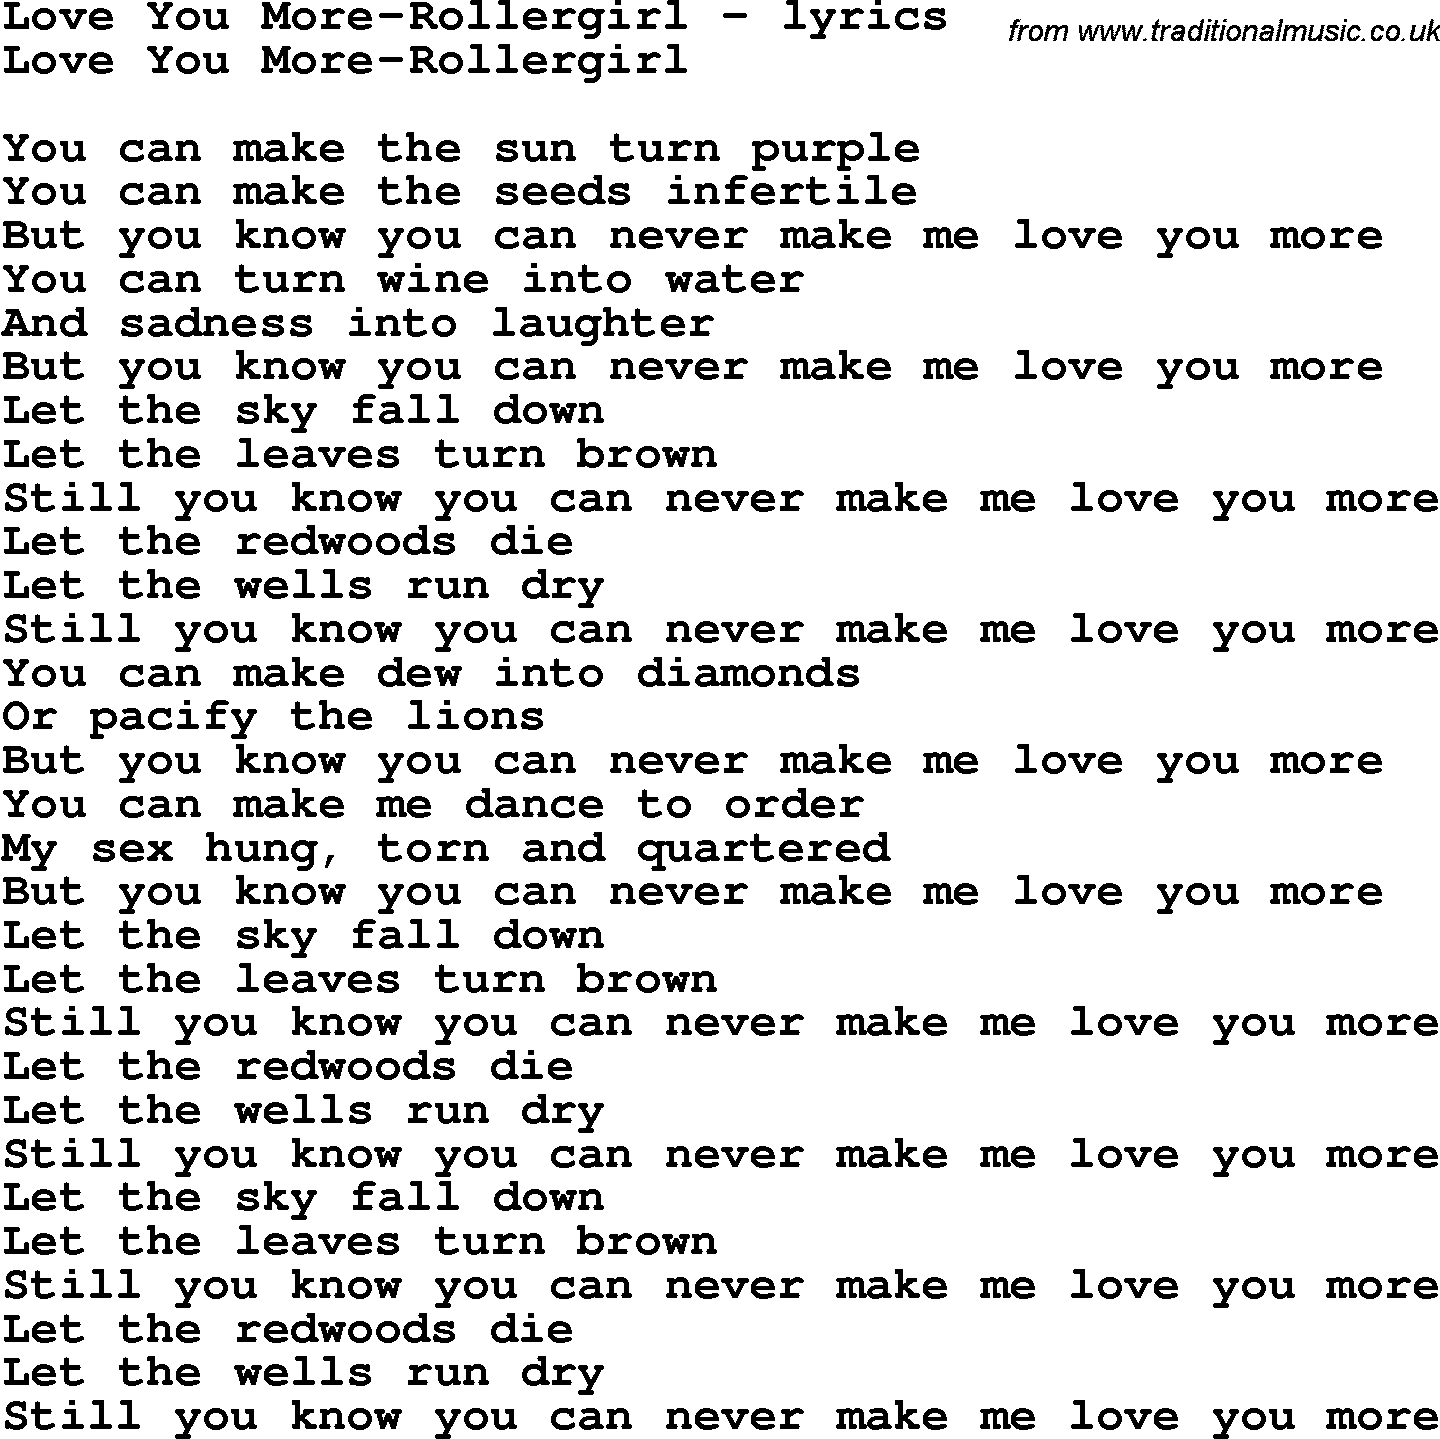 Love Song Lyrics for: Love You More-Rollergirl